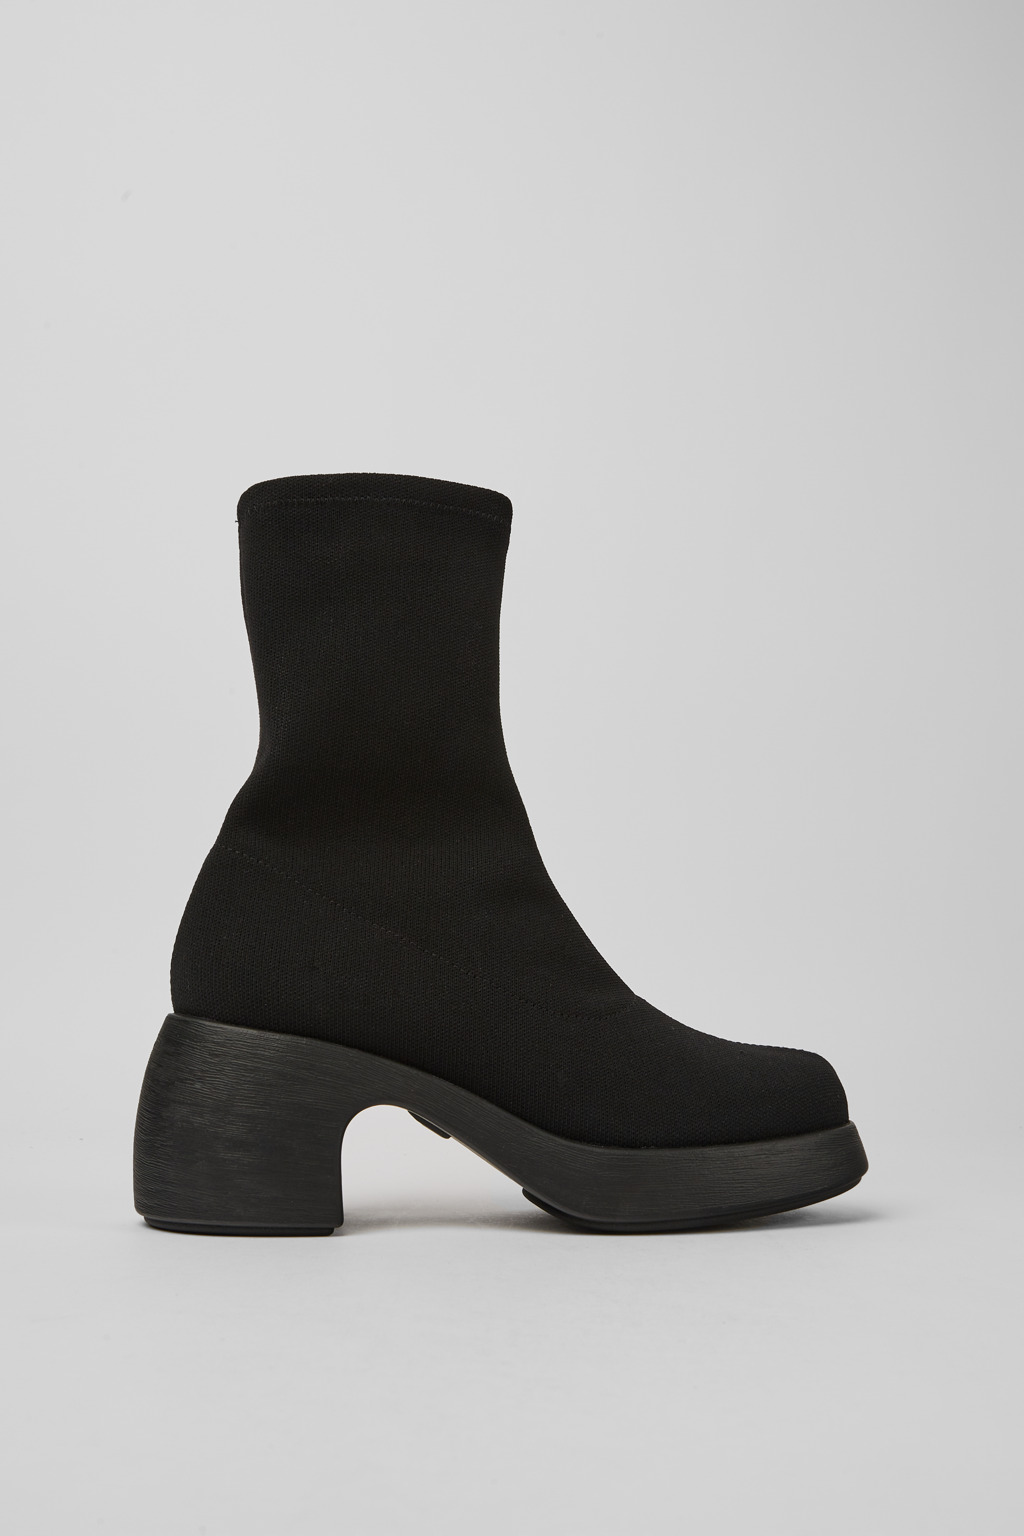 Thelma Black Boots for Women - Fall/Winter collection - Camper 